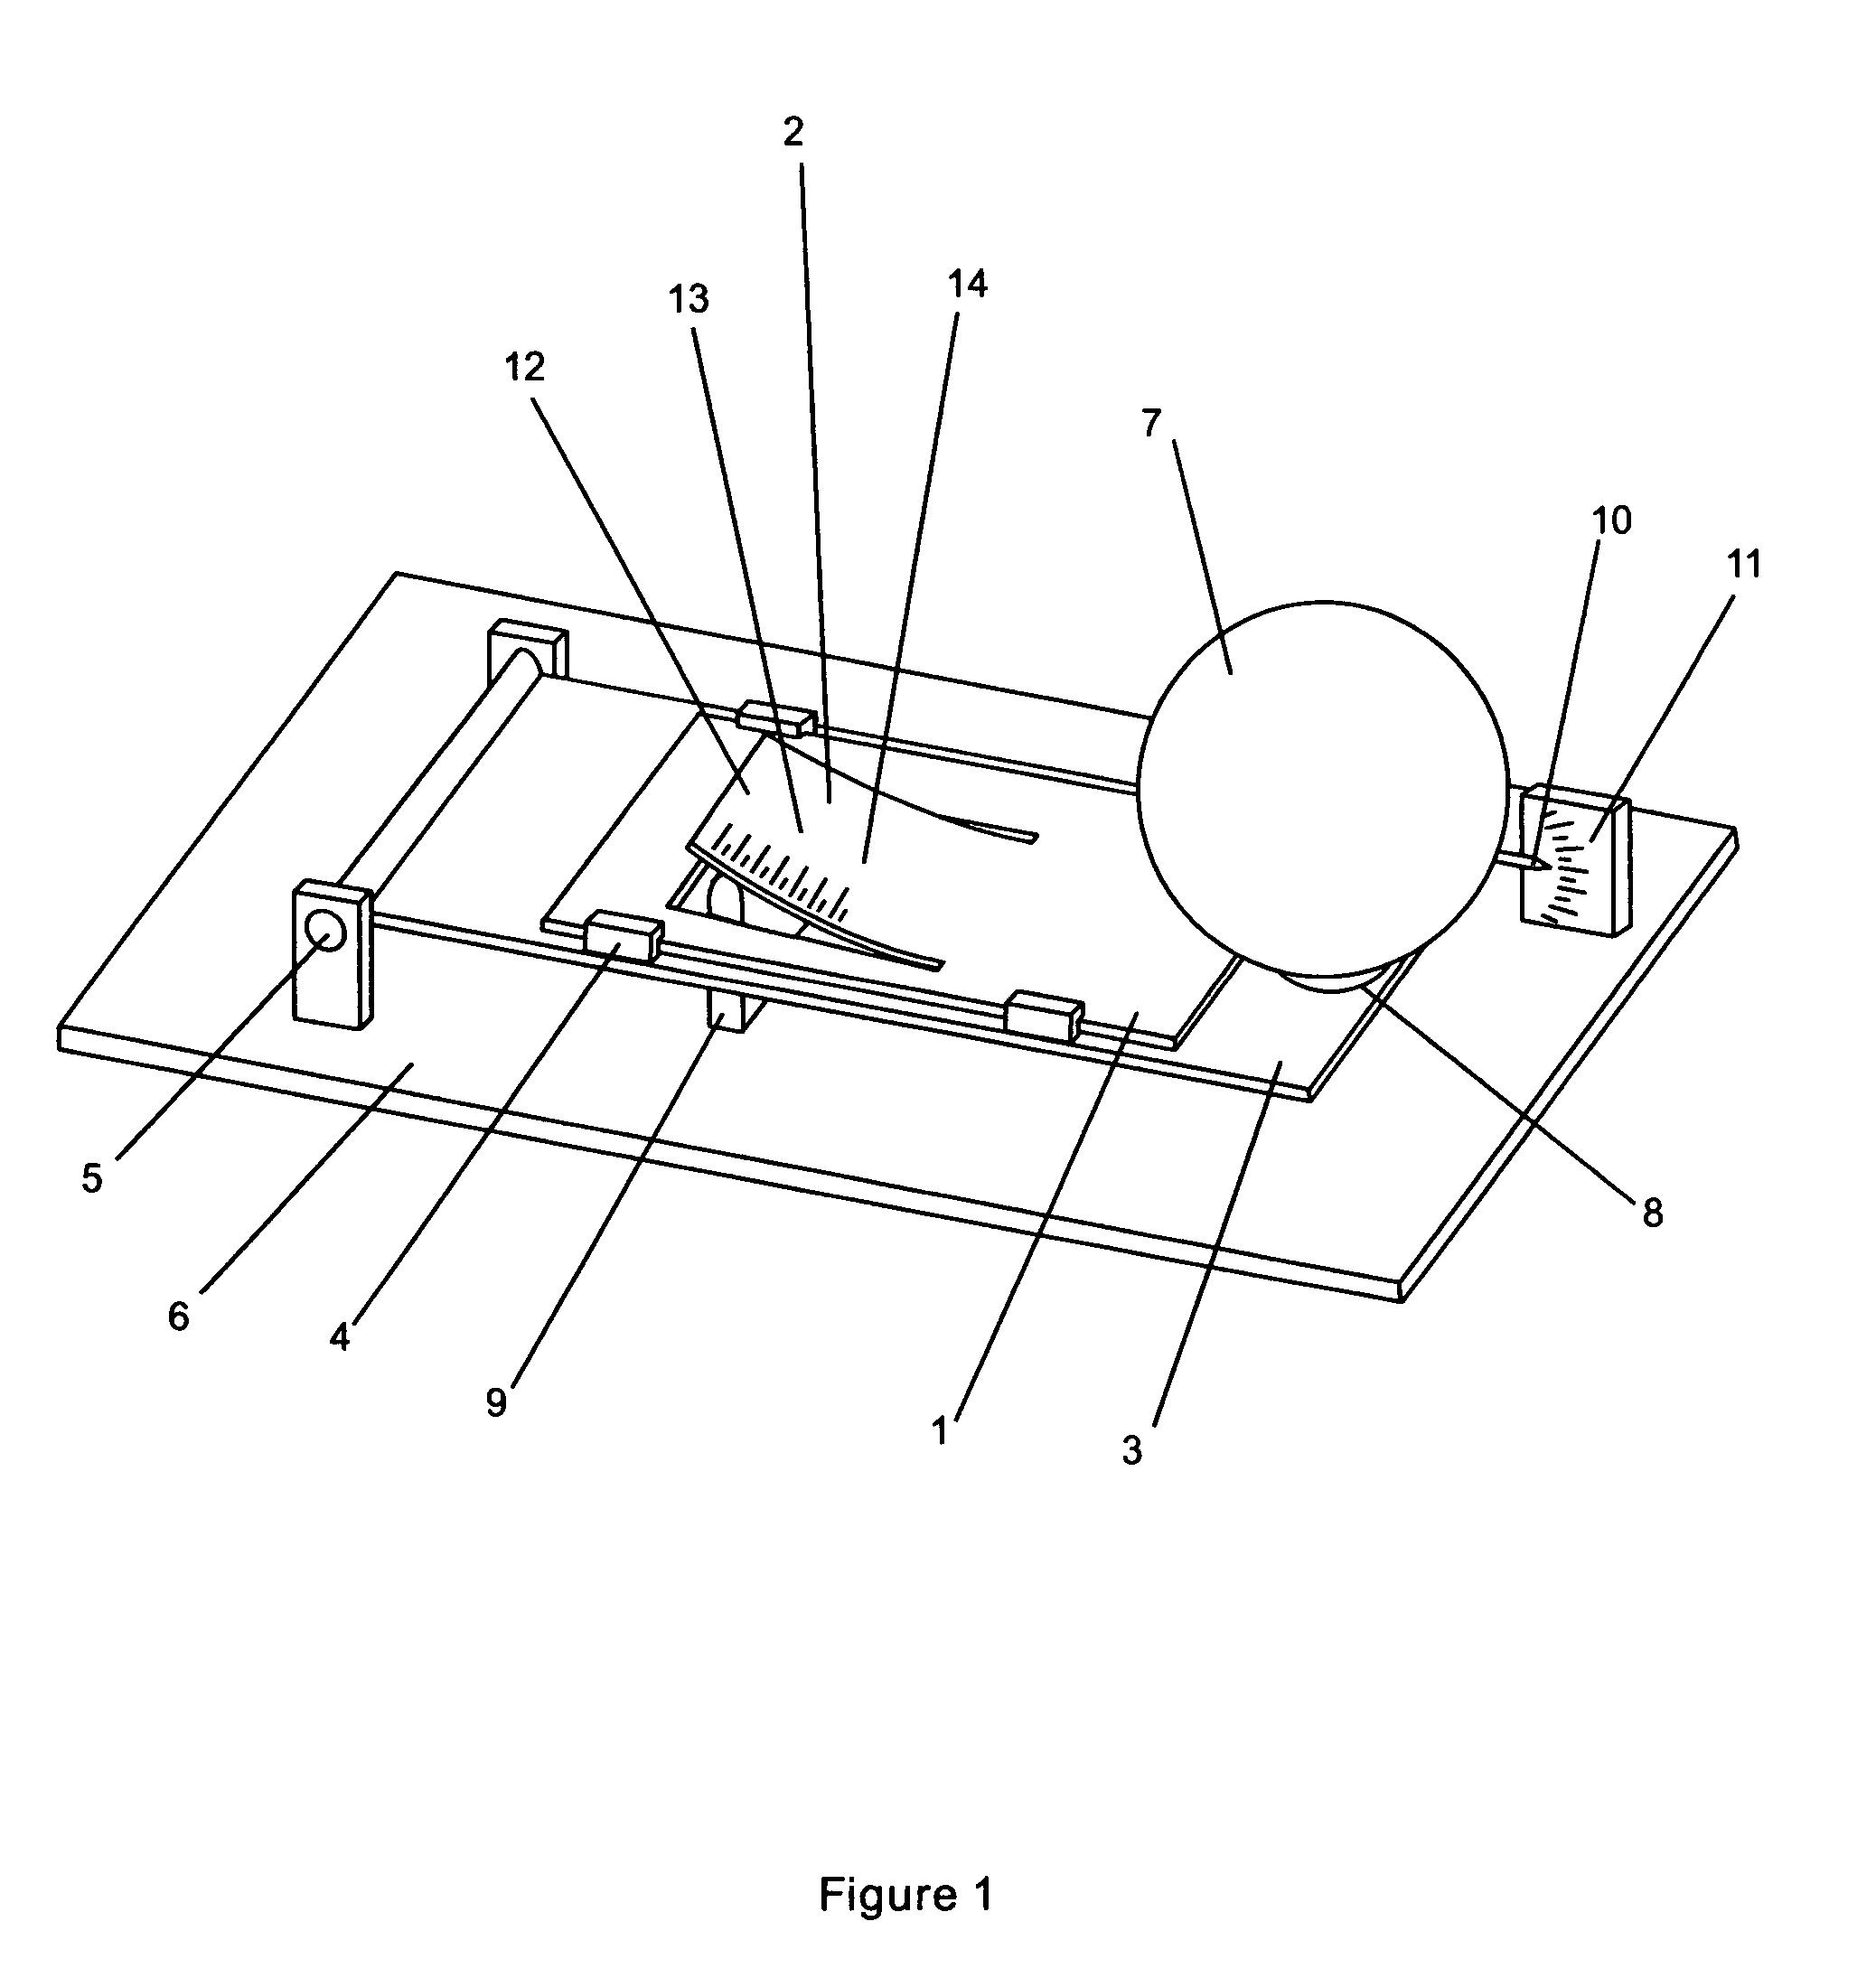 Apparatus for determining relative density of produce using weighing and size measuring